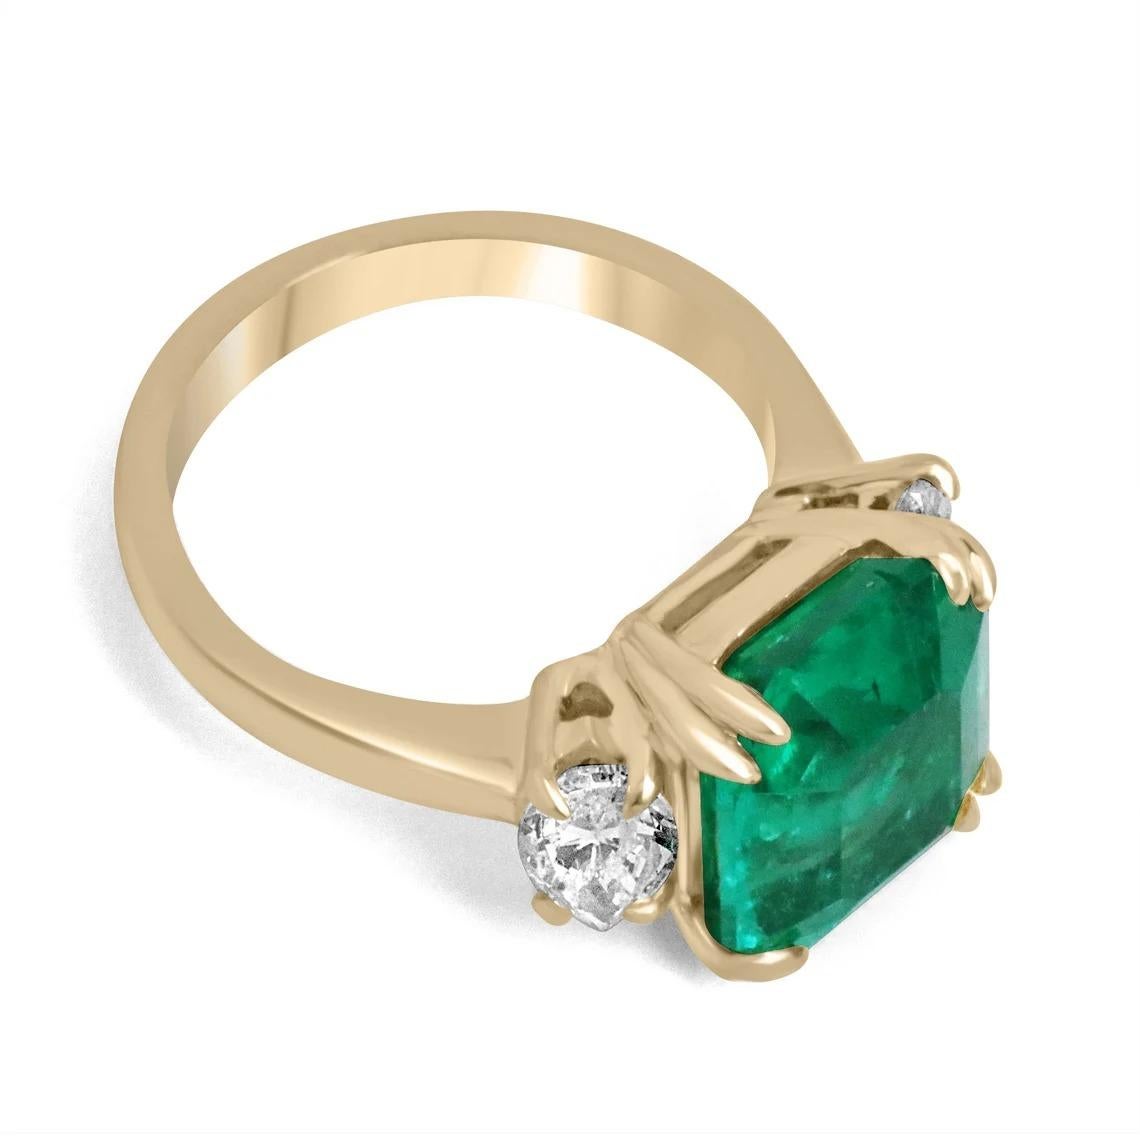 A dramatic emerald and diamond three-stone ring that is sure to turn heads anywhere you may take it. This classic piece features an exceptional 5.49-carat, Colombian emerald that appears much larger due to its widespread. The gemstone displays the